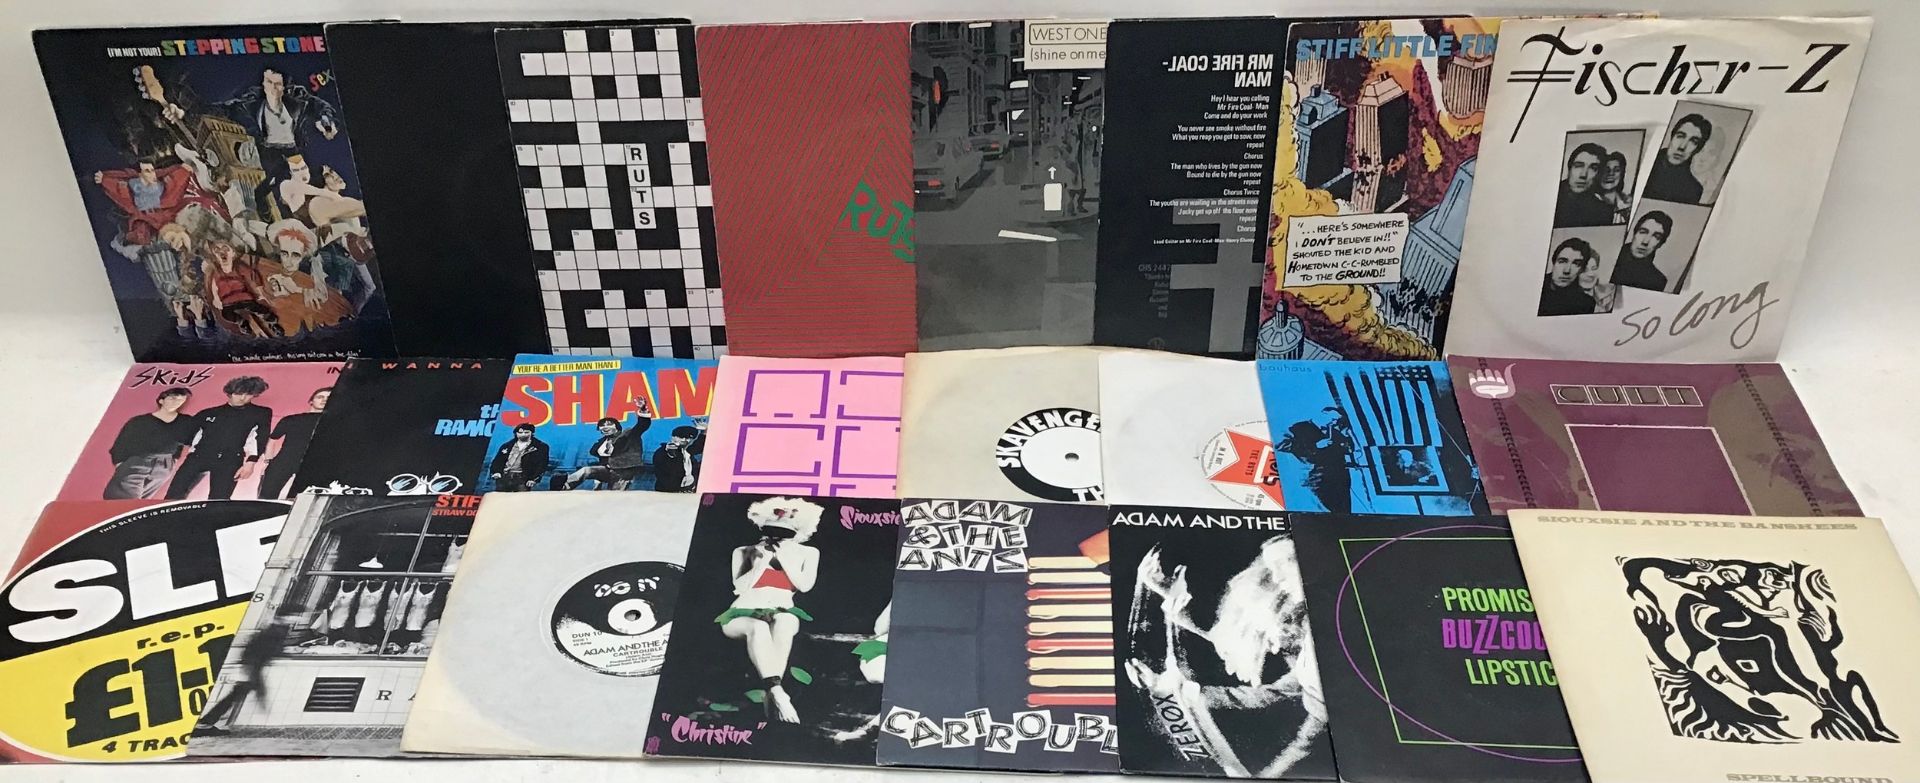 PUNK RELATED SINGLES COLLECTION. All found here in Ex conditions. Artist’s include - Buzzcocks - The